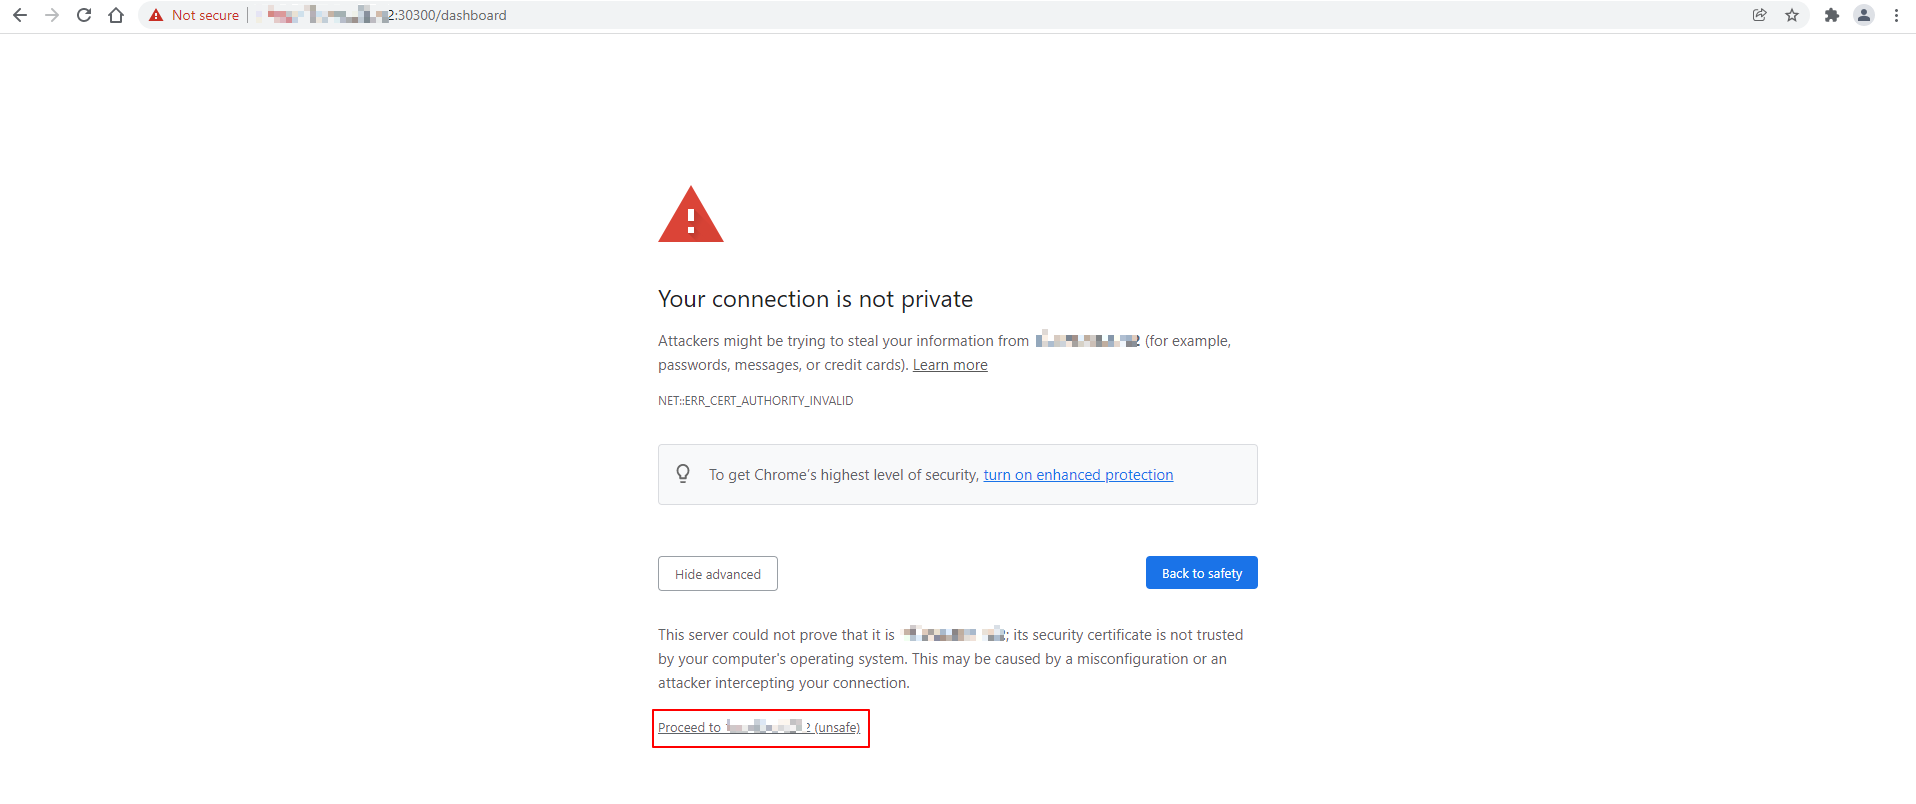 A browser window using the ITM dashboard URL and showing a warning message “Your connection is not private”. The option to Proceed to the website is outlined in red, indicating you should click the link.